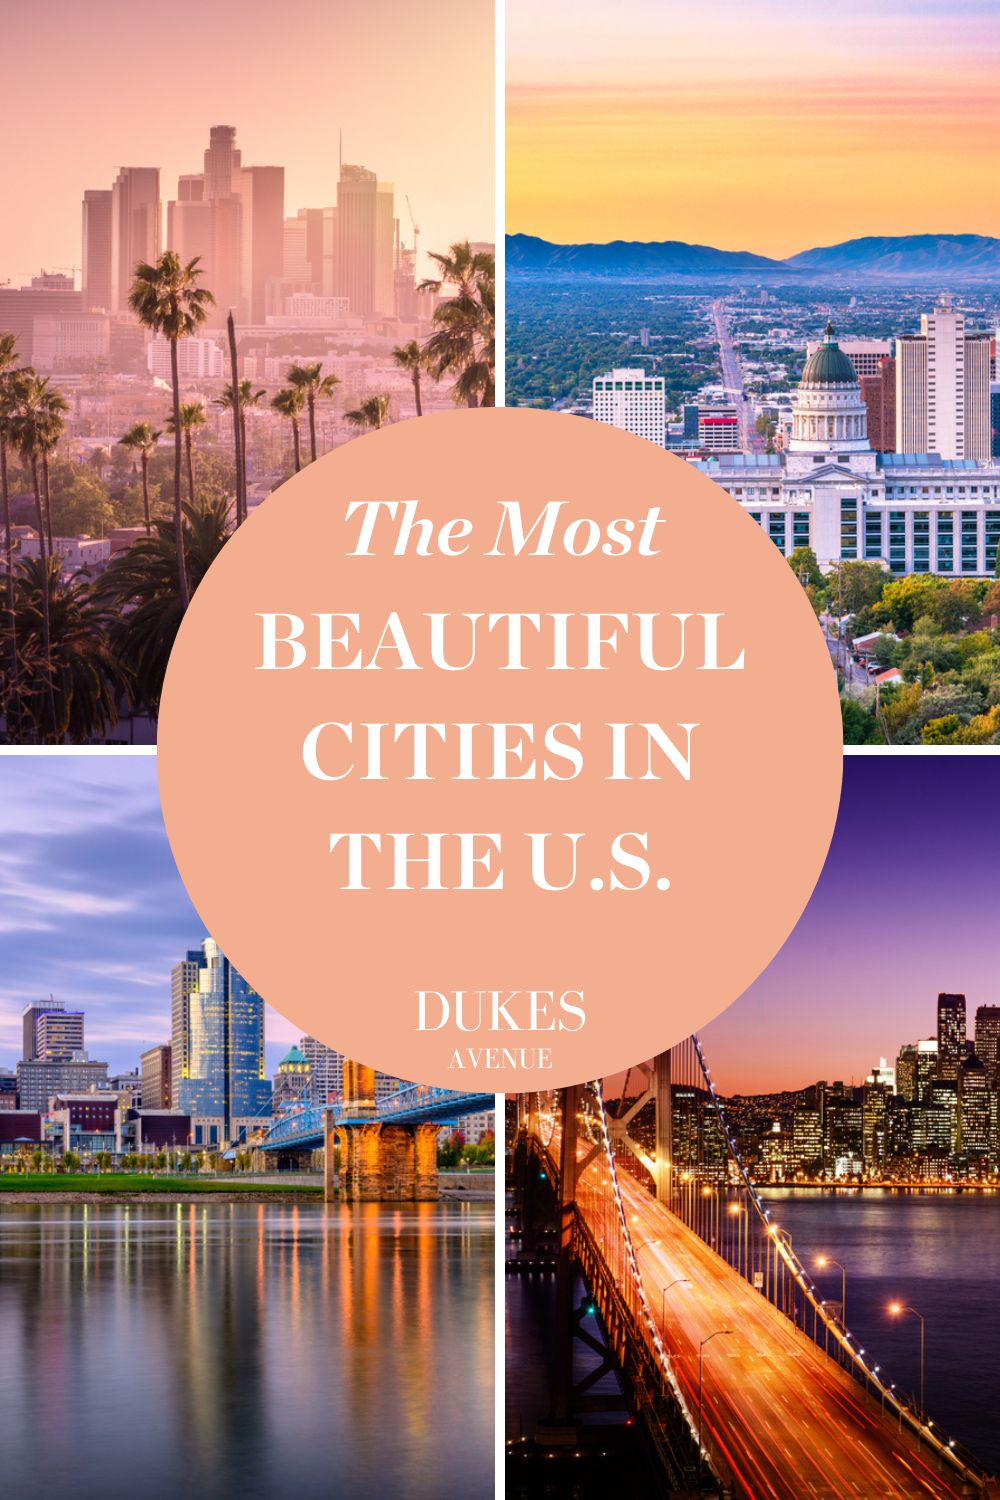 Four images of various cities in the U.S. with text overlay 'The Most Beautiful Cities in the U.S.'